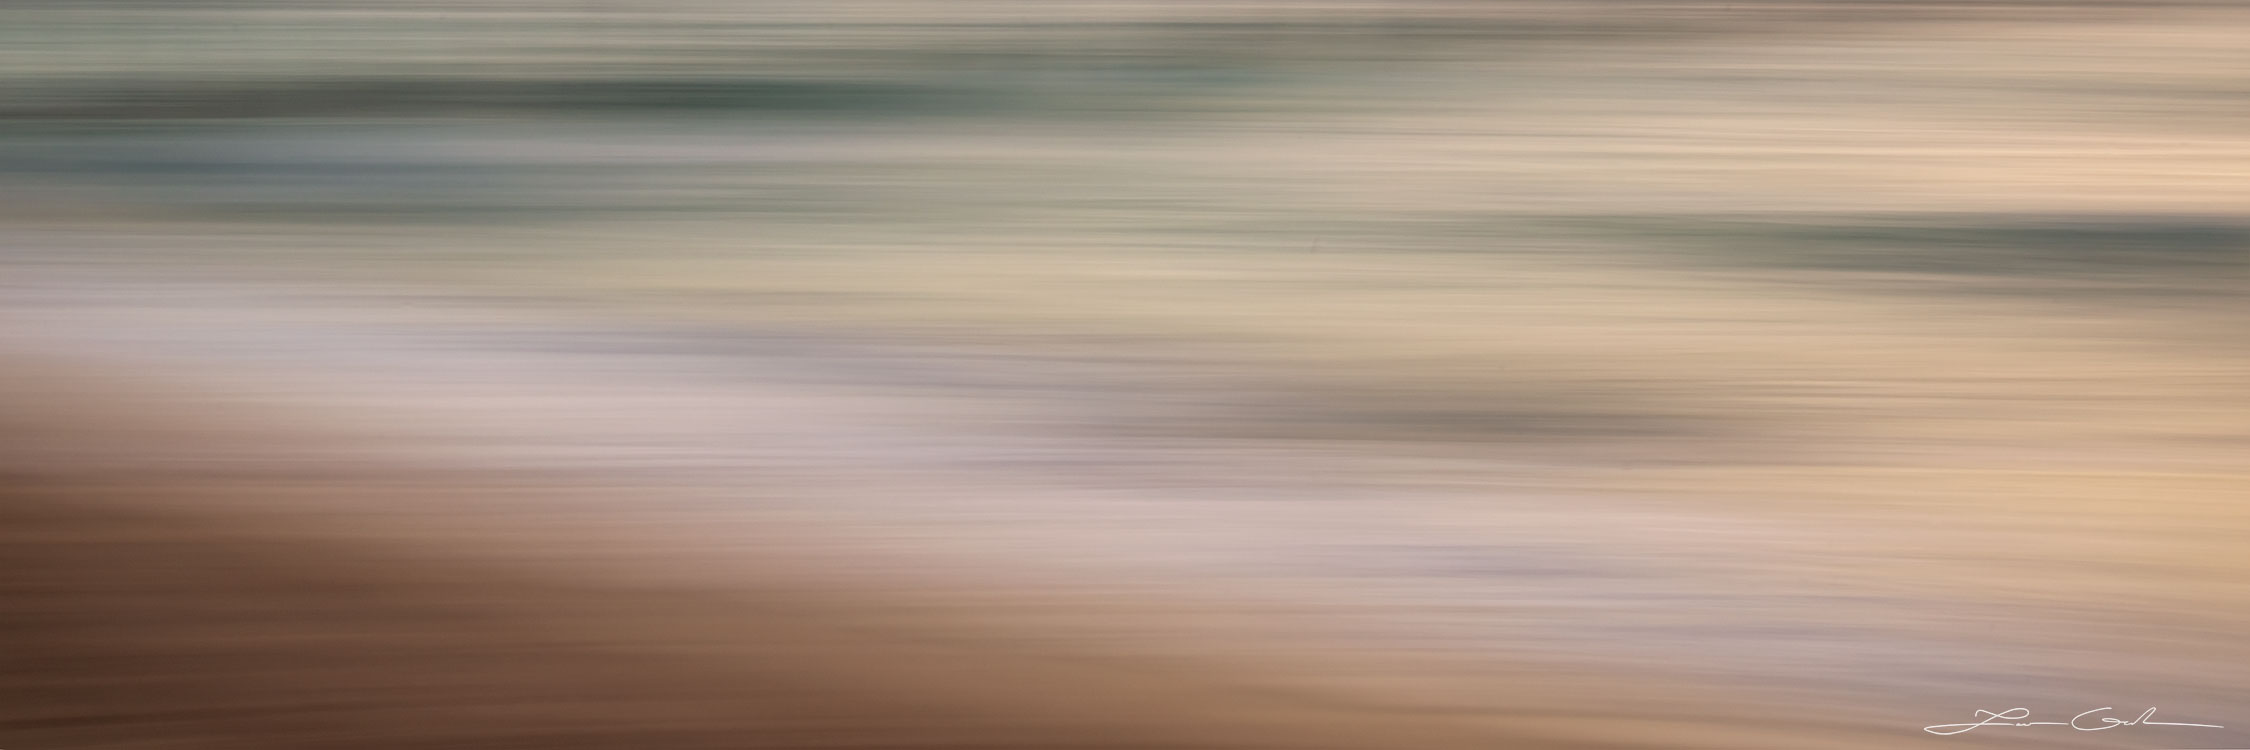 An intimate ocean shore abstract panoramic image - Gintchin Fine Art